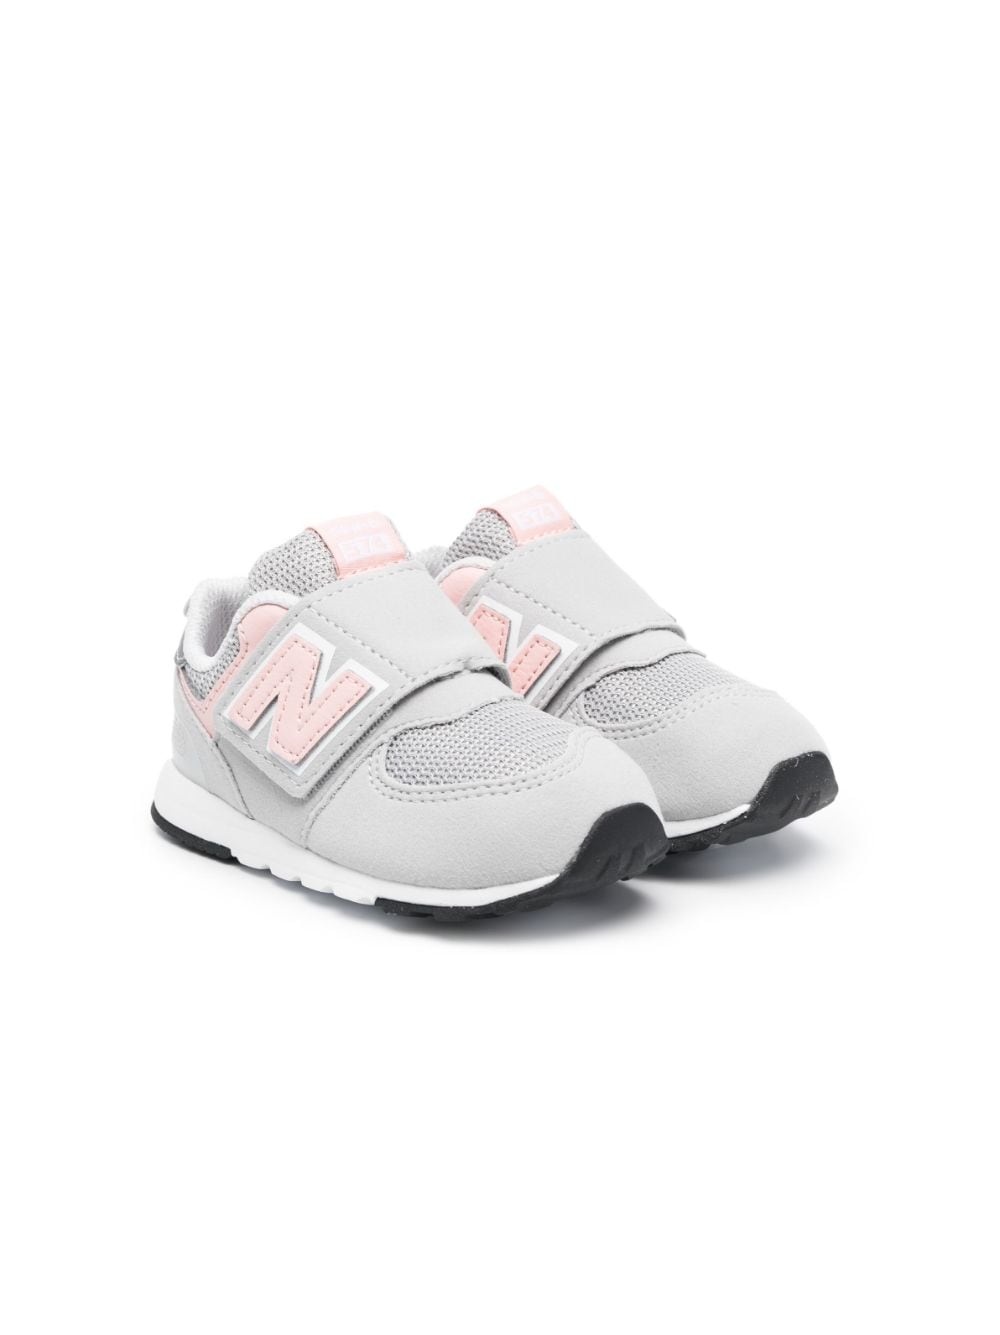 New Balance Kids 574 touch-strap sneakers - Grey